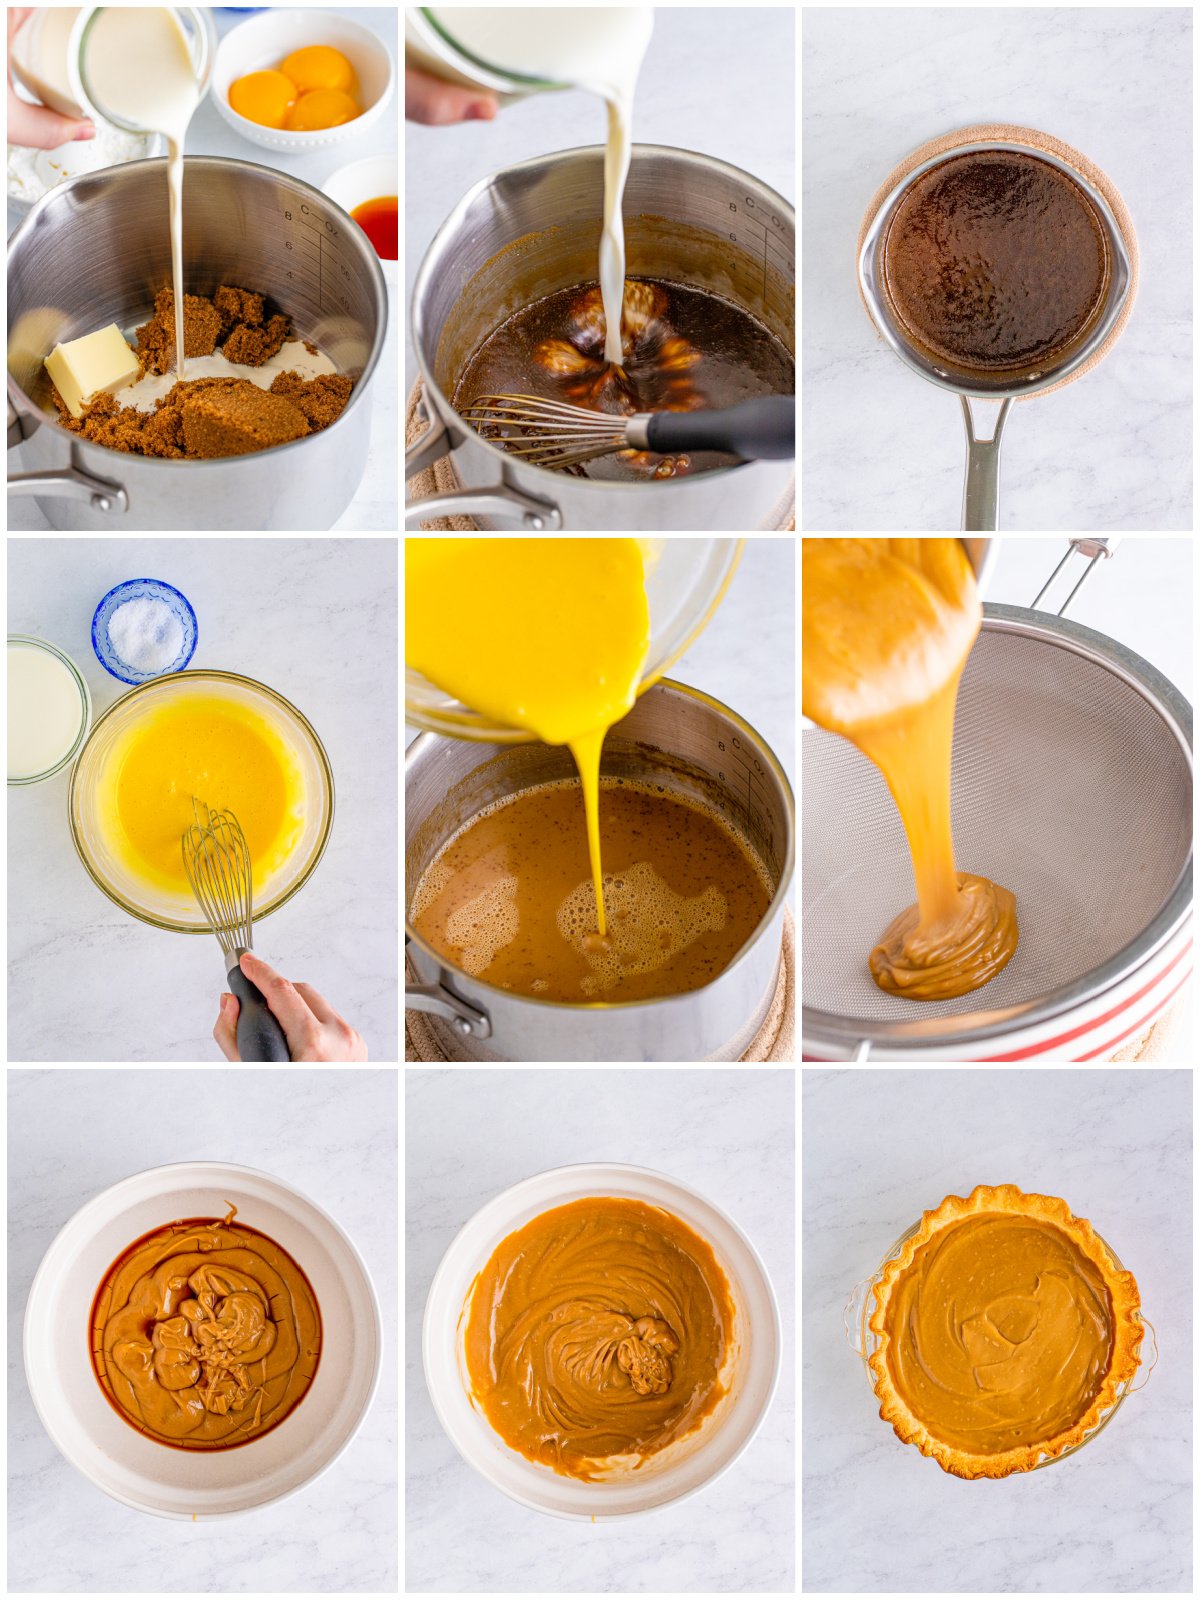 Step by step photos on how to make a Butterscotch Pie.